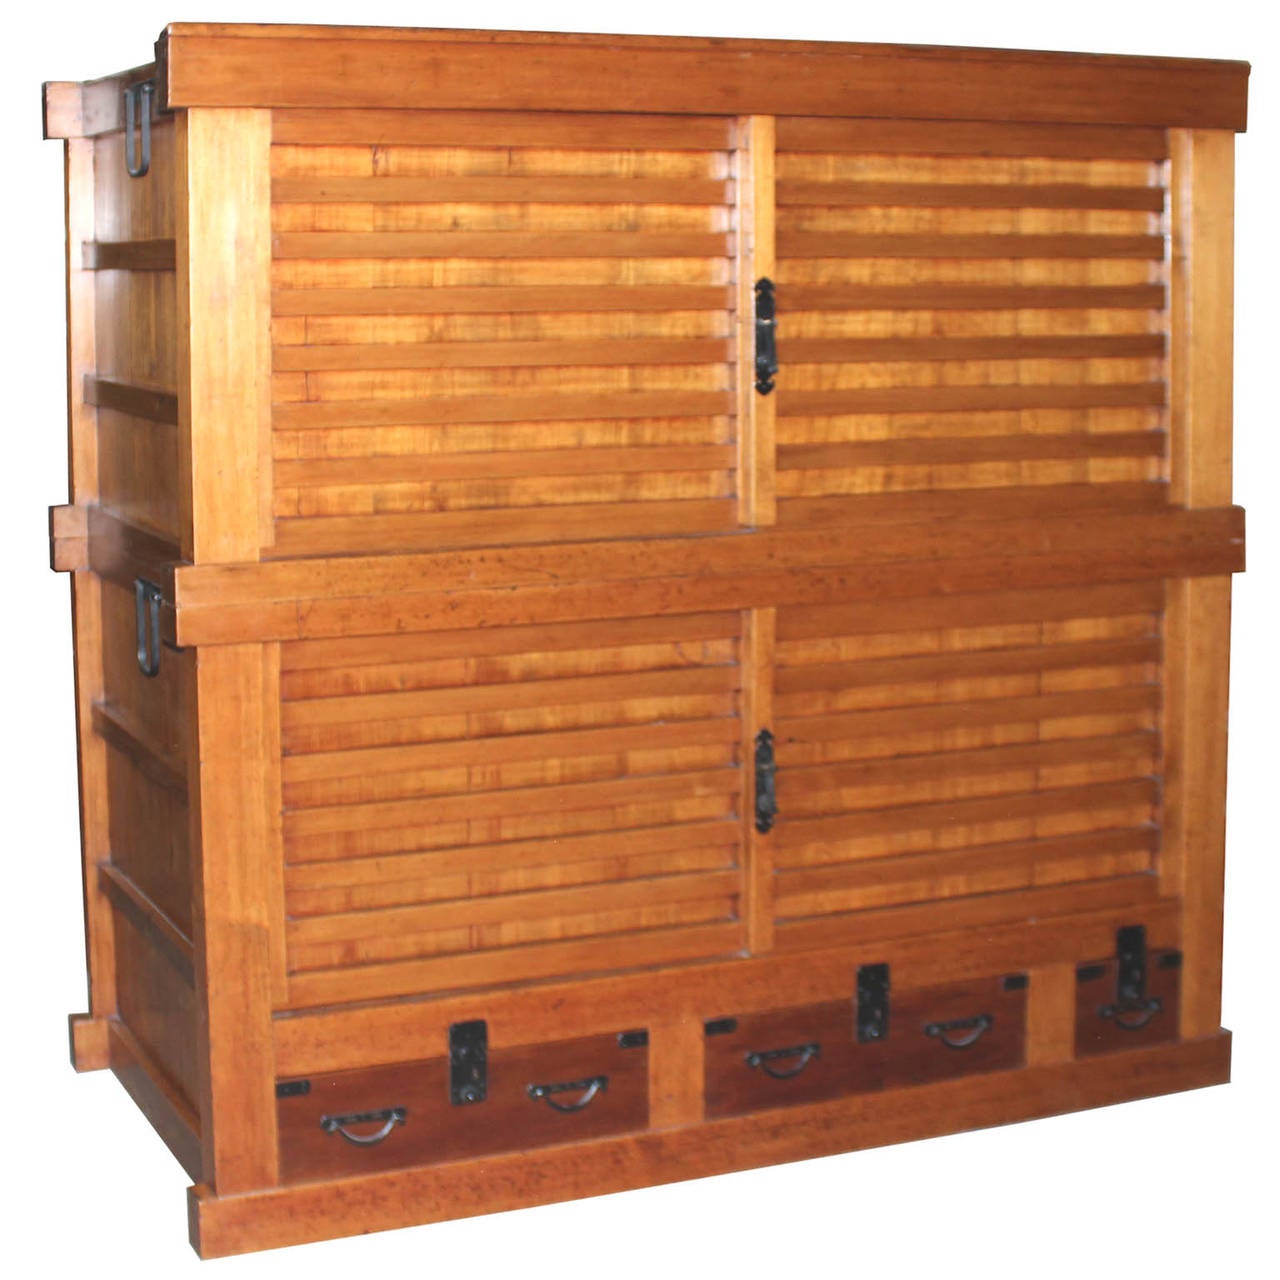 Two section Japanese futon dansu originally used to store bedding. Large tansu can be used as a media cabinet or for storage in the dining room for big platters and linens. Kyoto, Japan, circa 1850s.